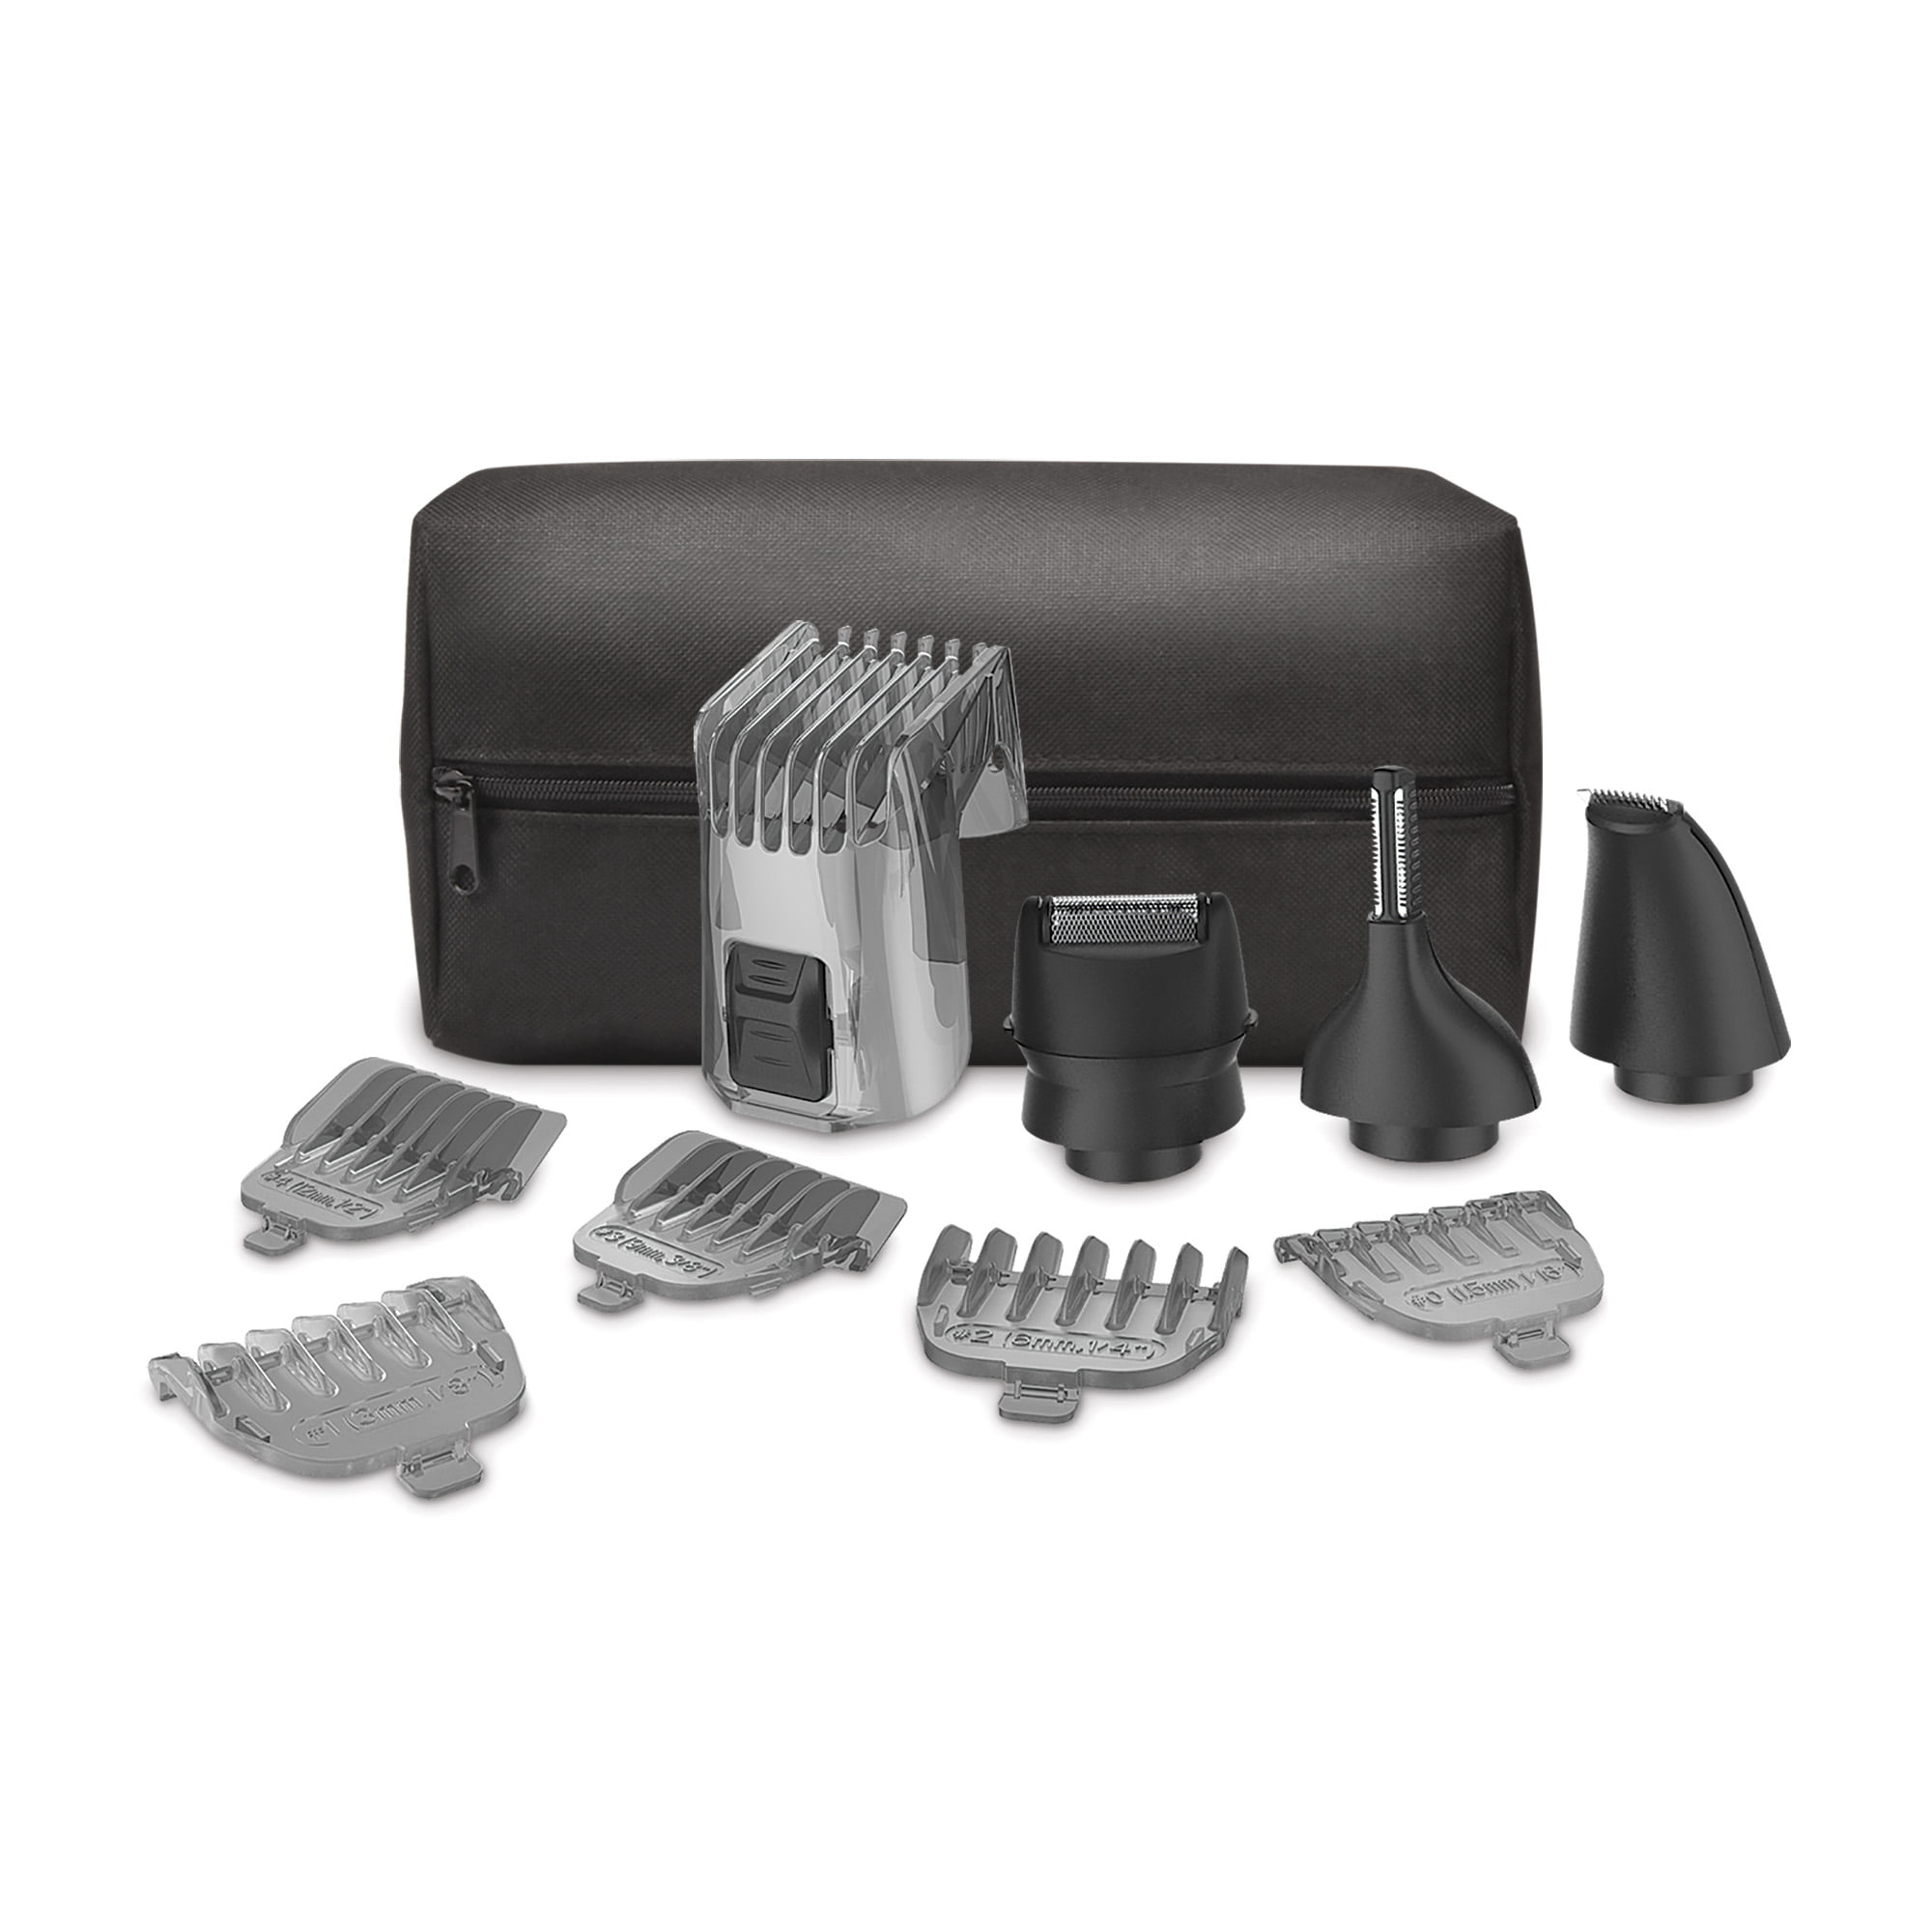 remington crafter beard boss style and detail kit